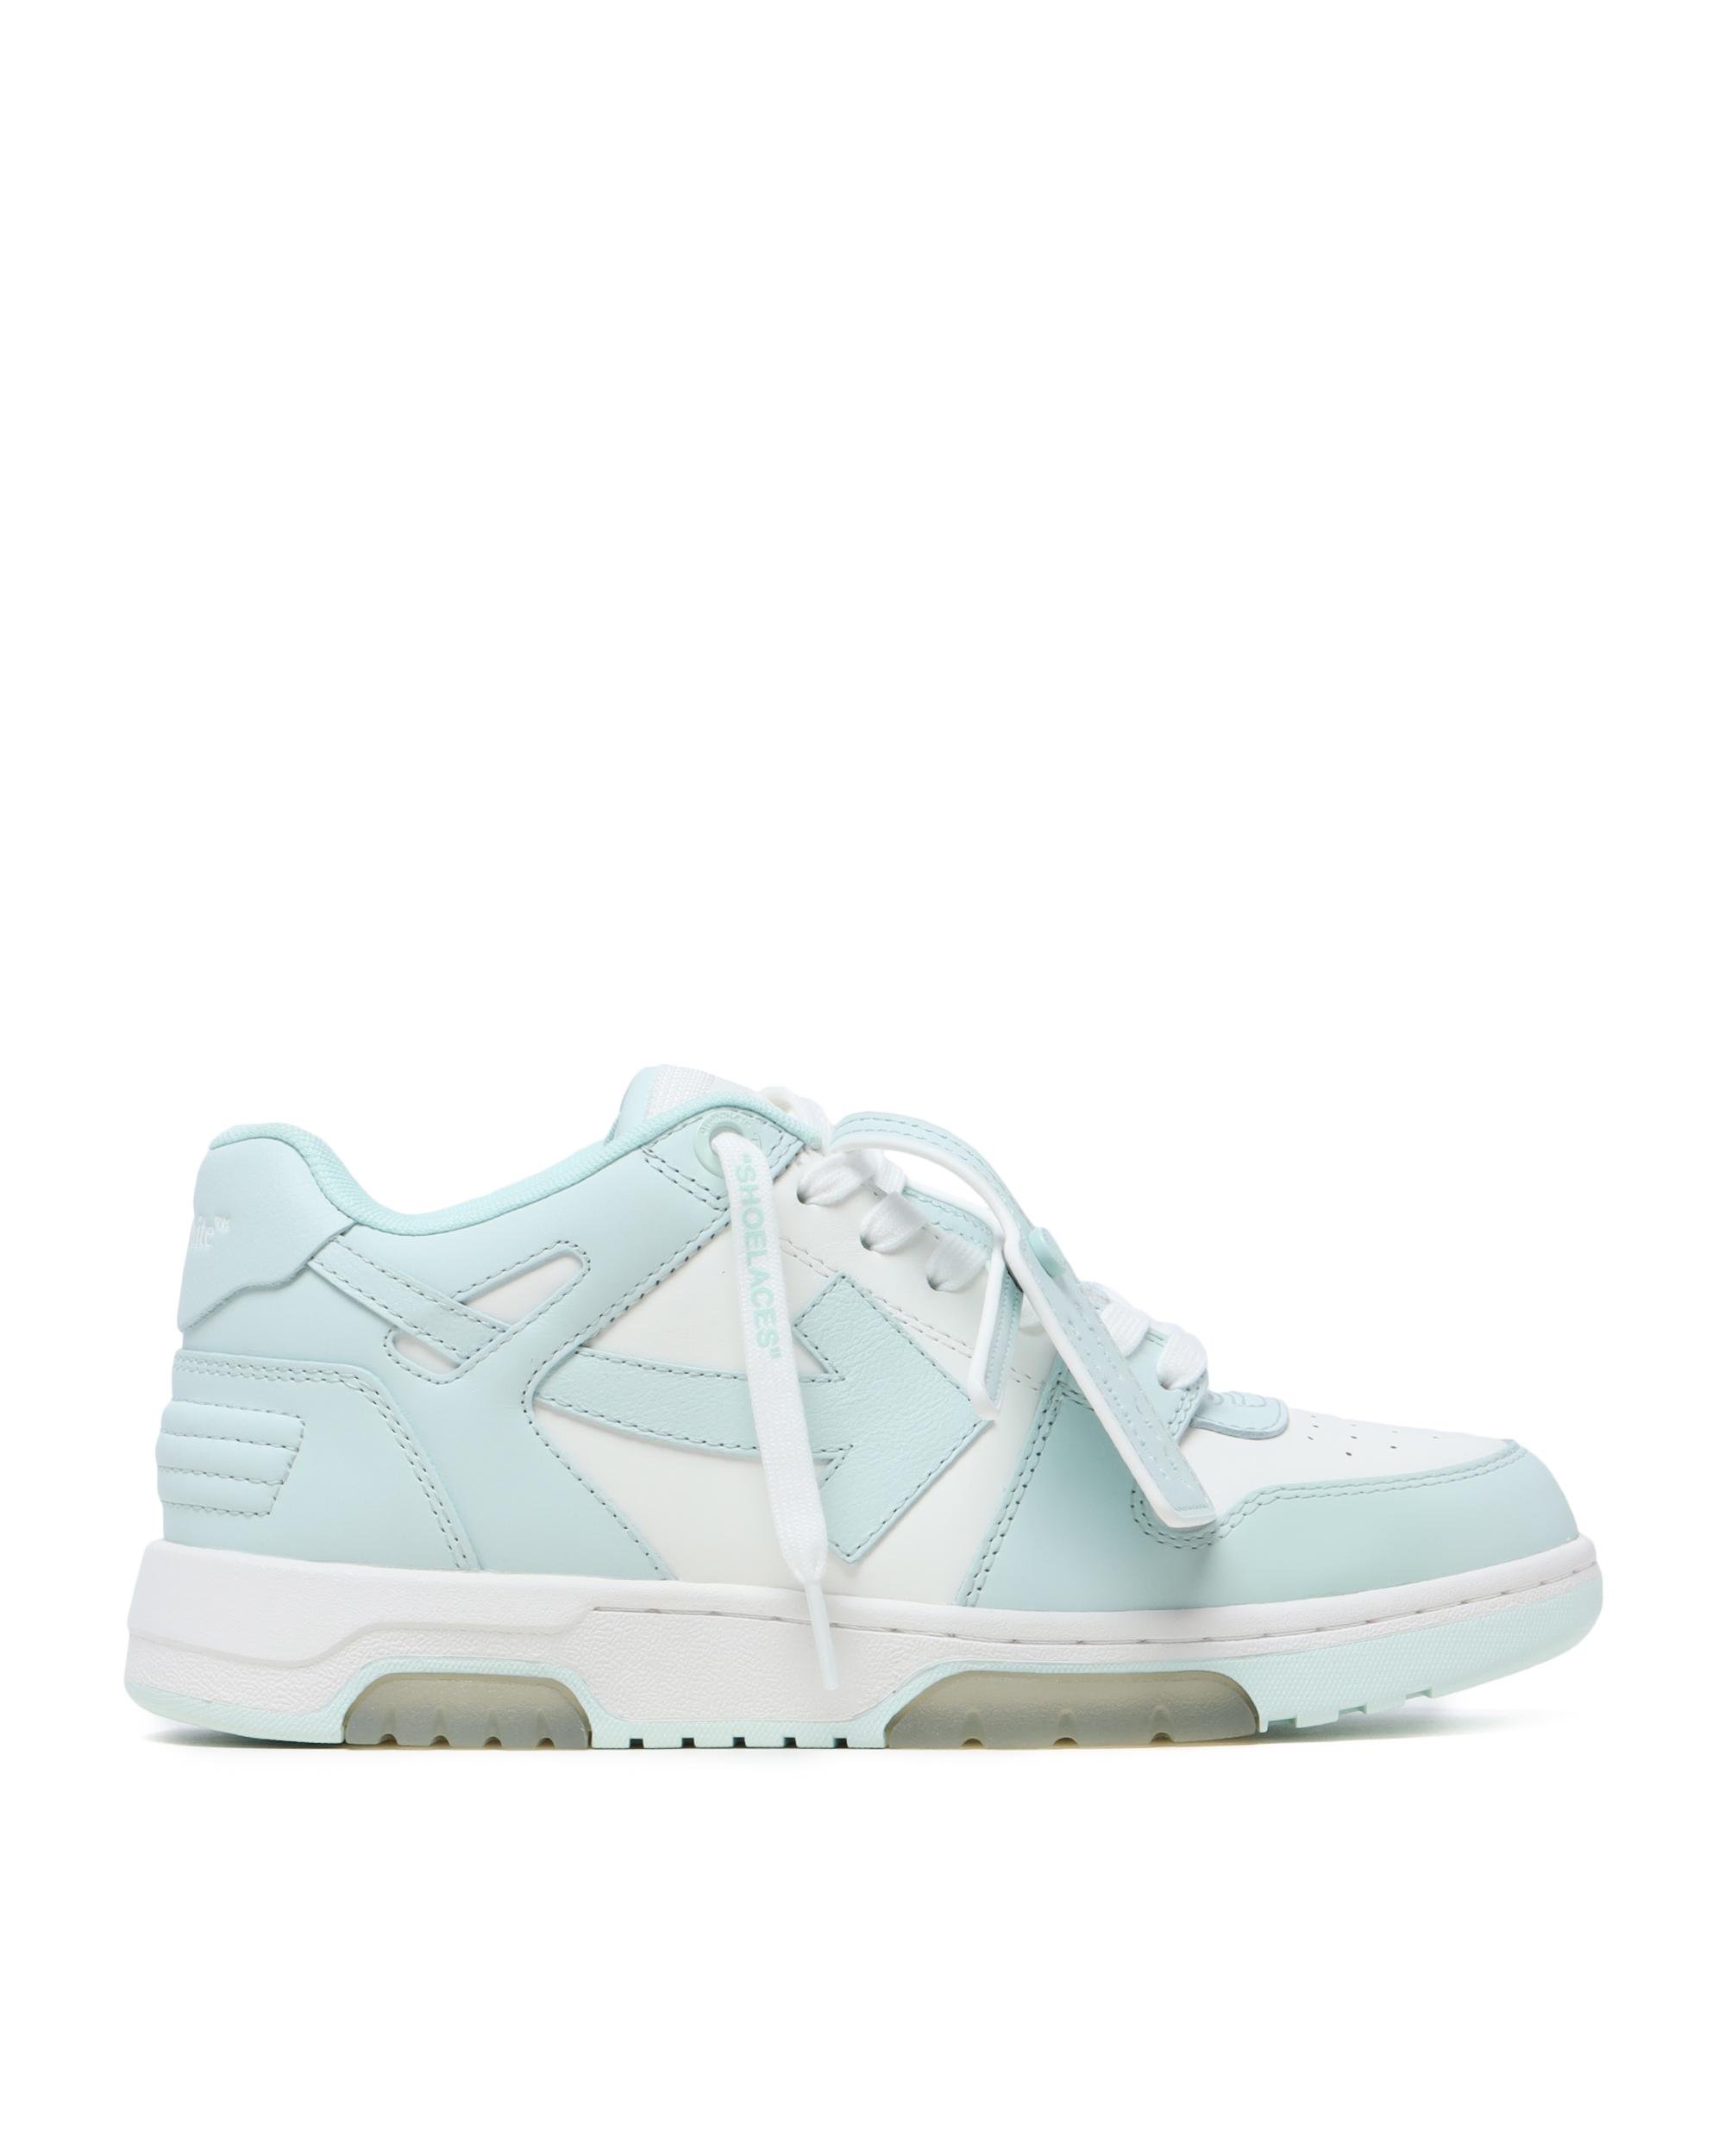 Out Of Office sneakers by OFF-WHITE